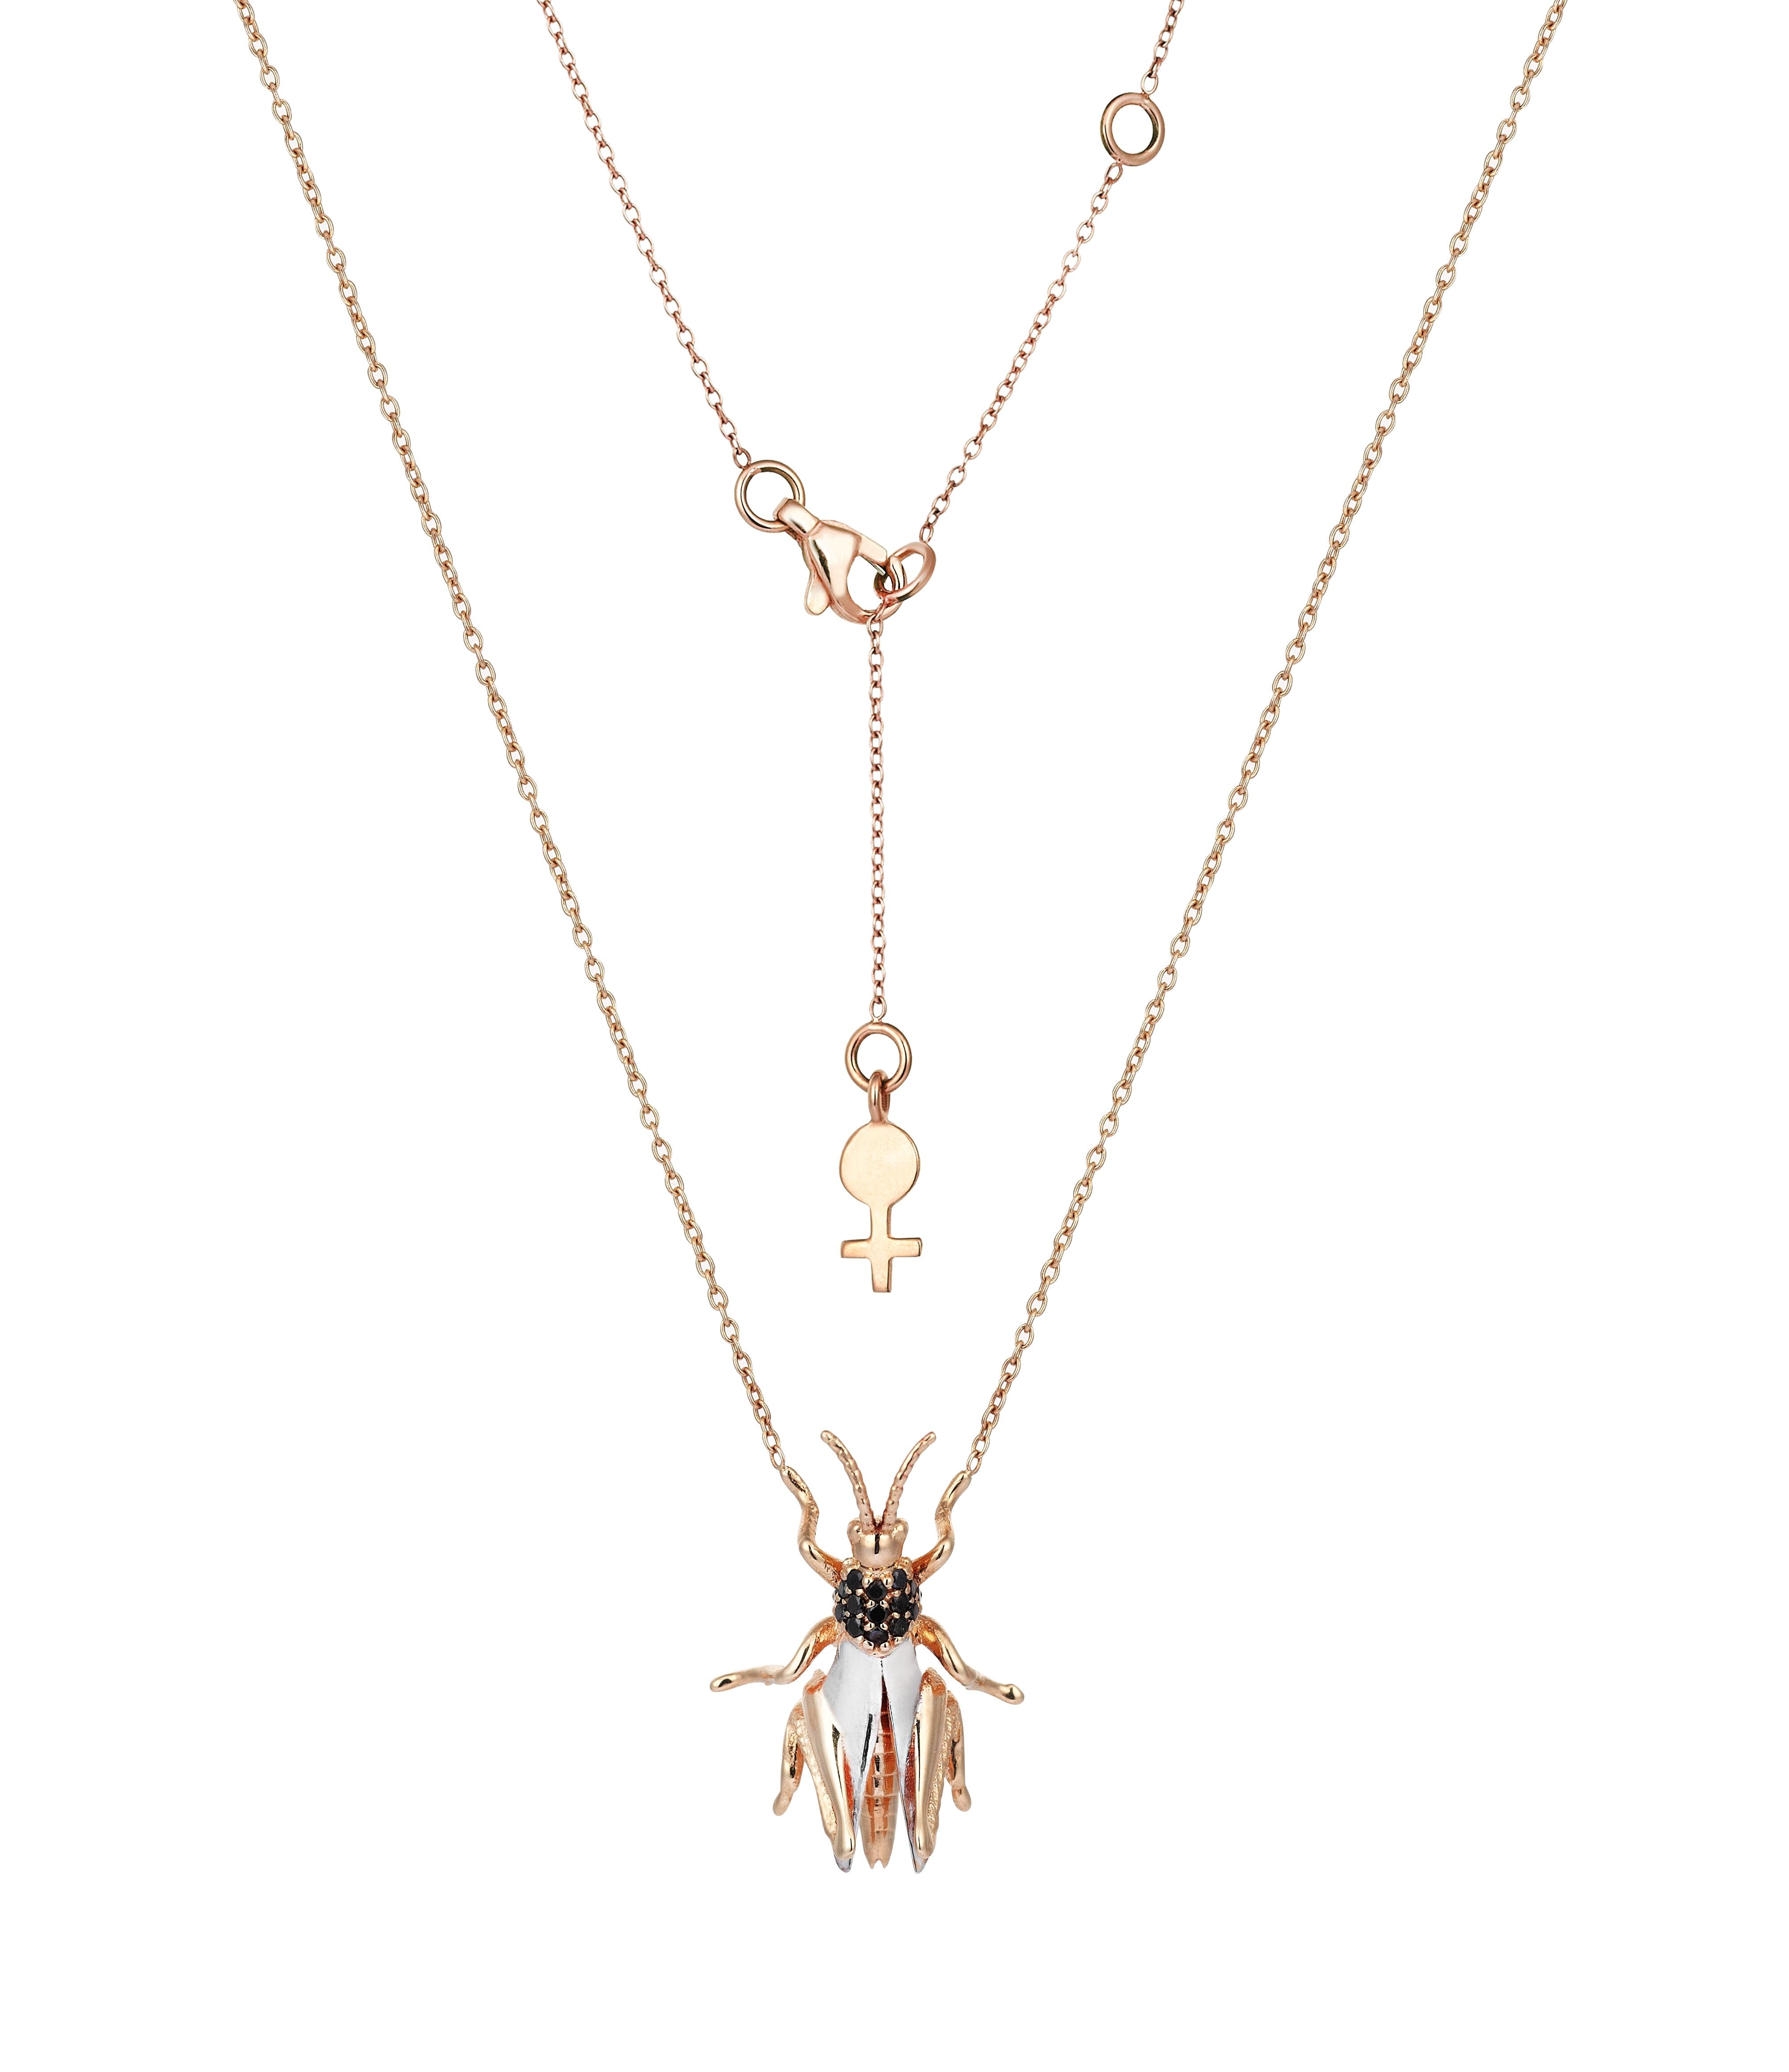 Grasshopper Necklace in Rose Gold - Her Story Shop